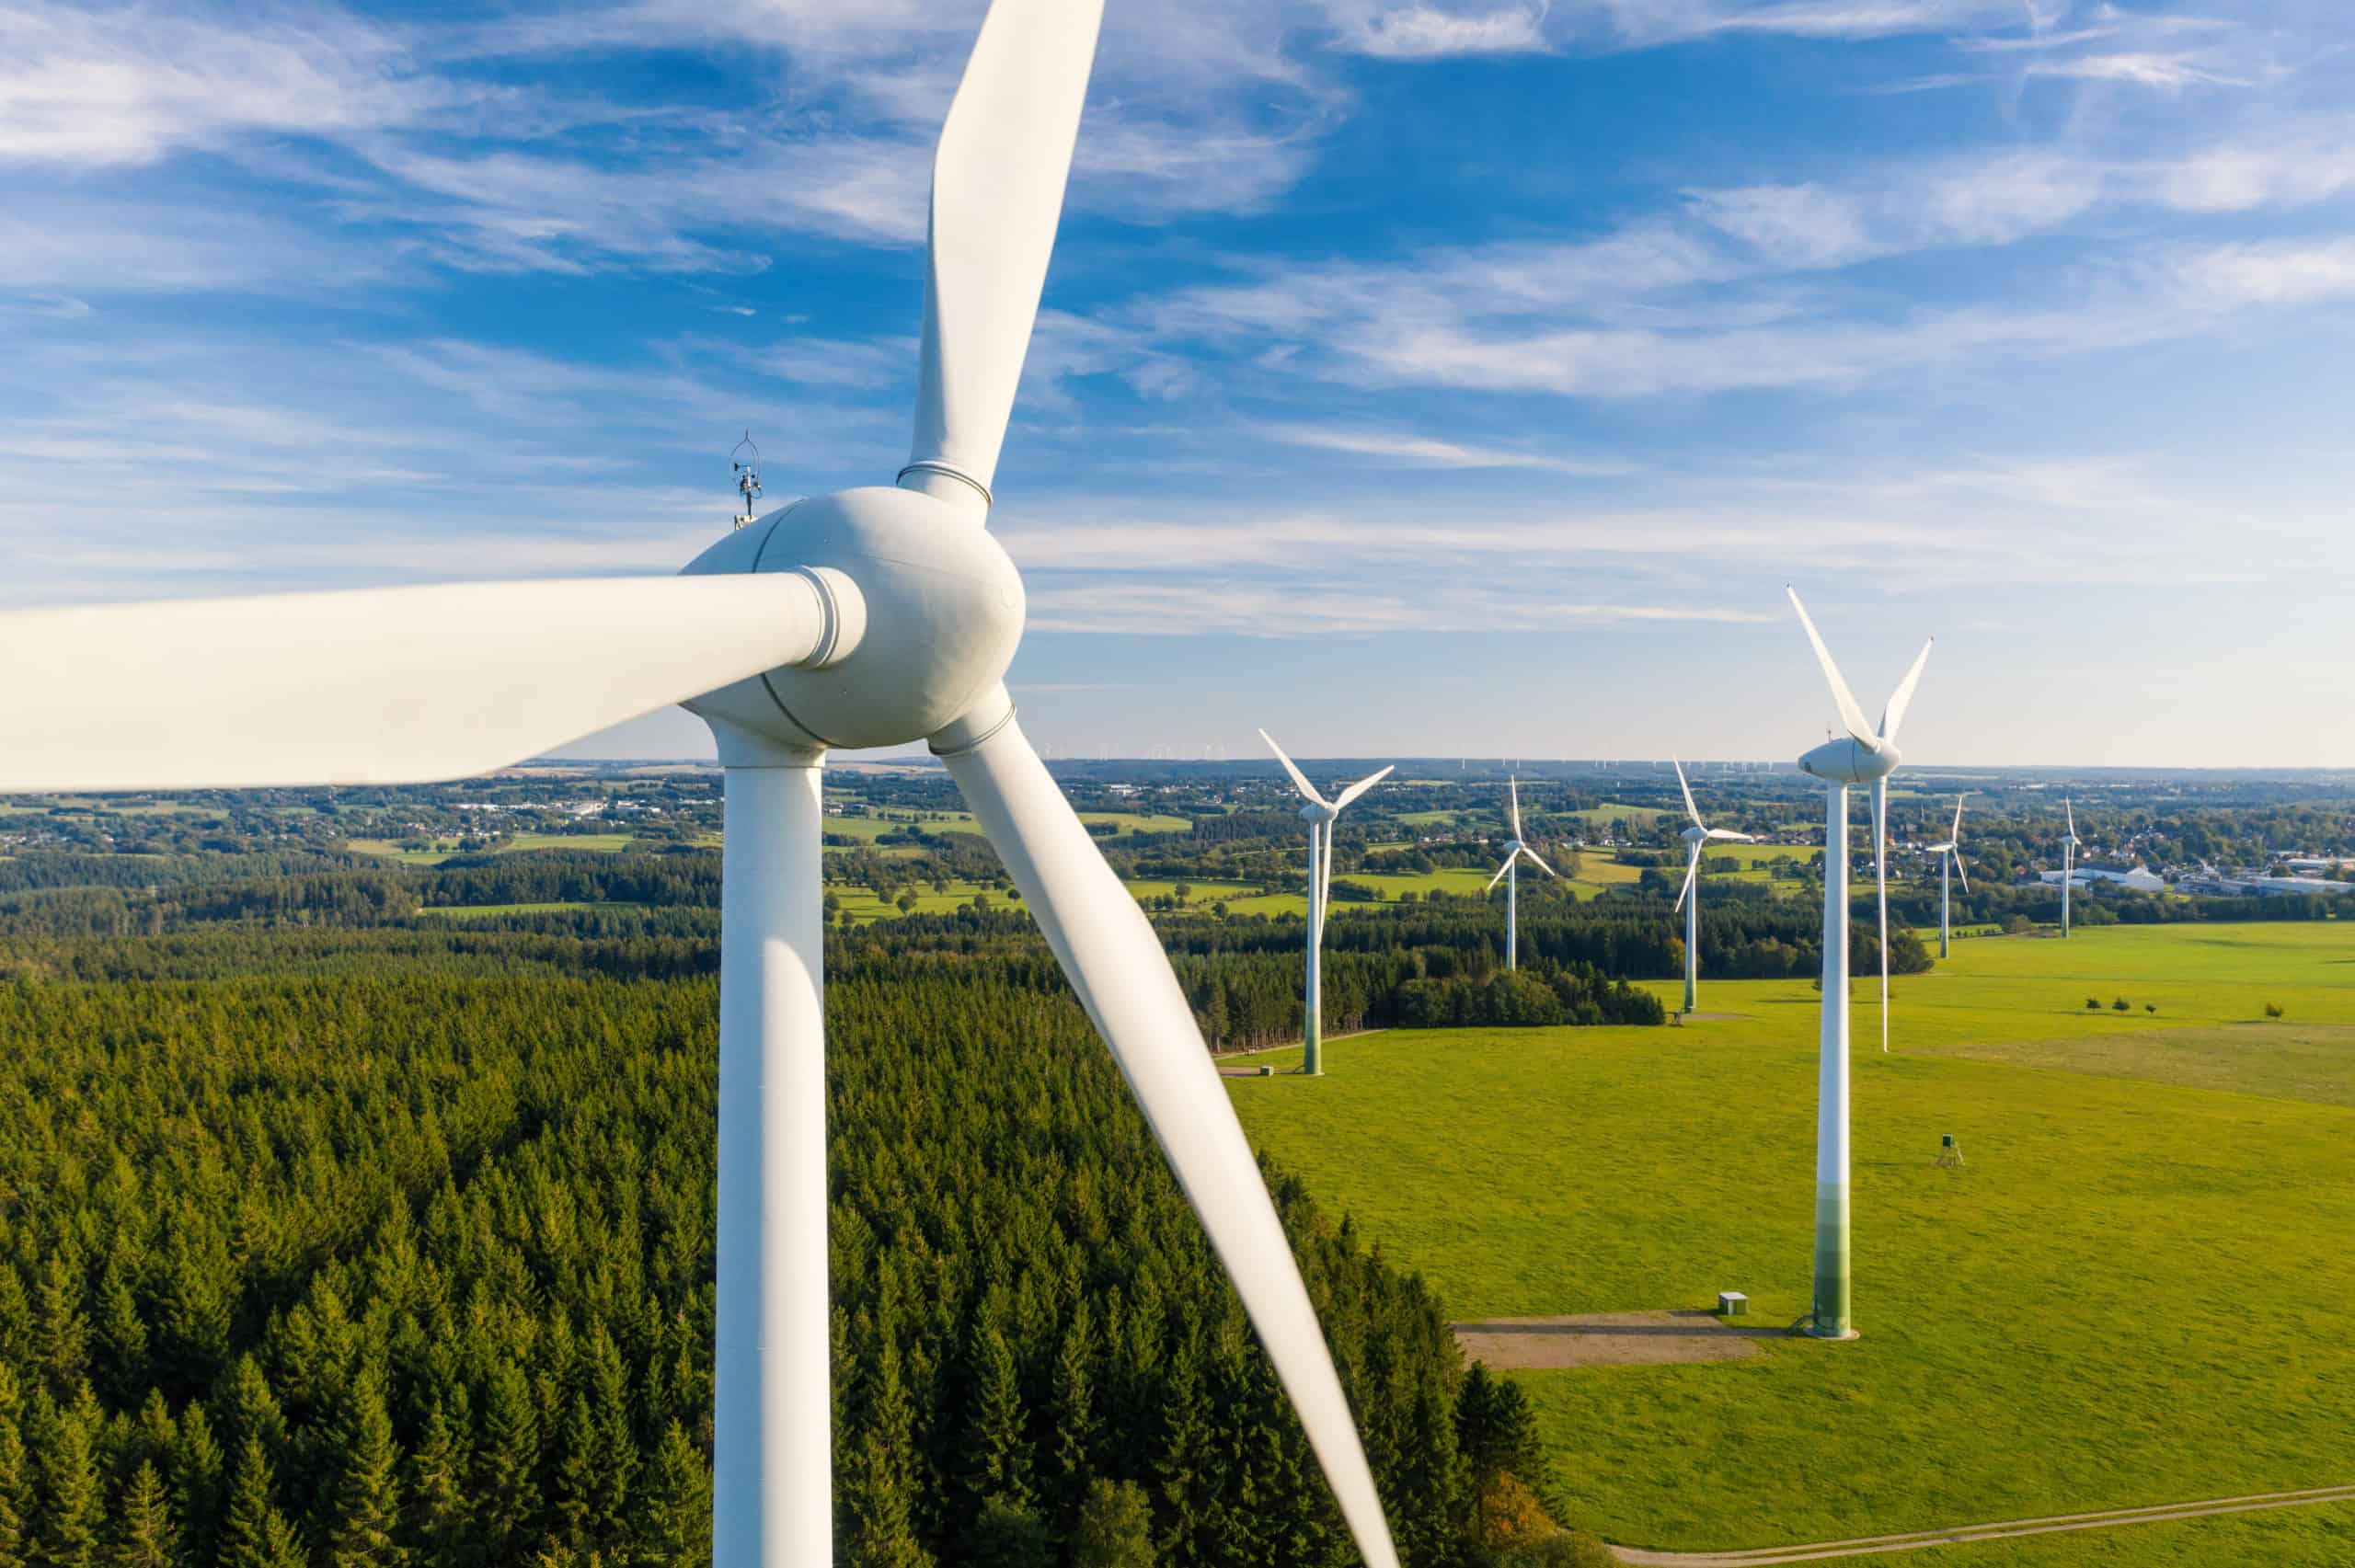 How Much Energy Does a Wind Turbine Produce?